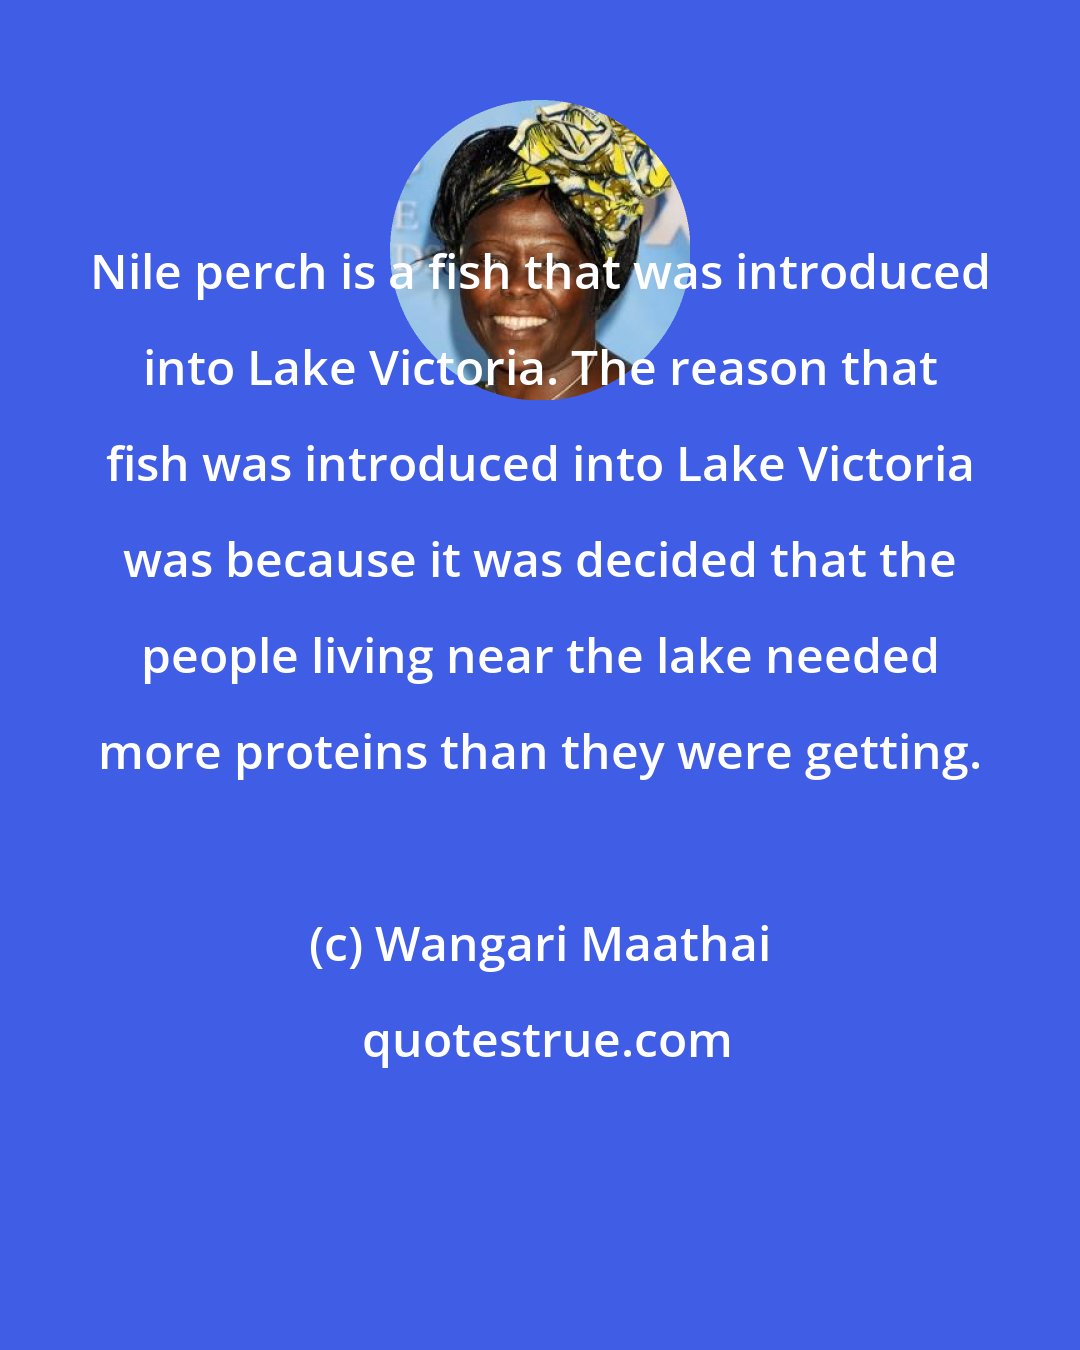 Wangari Maathai: Nile perch is a fish that was introduced into Lake Victoria. The reason that fish was introduced into Lake Victoria was because it was decided that the people living near the lake needed more proteins than they were getting.